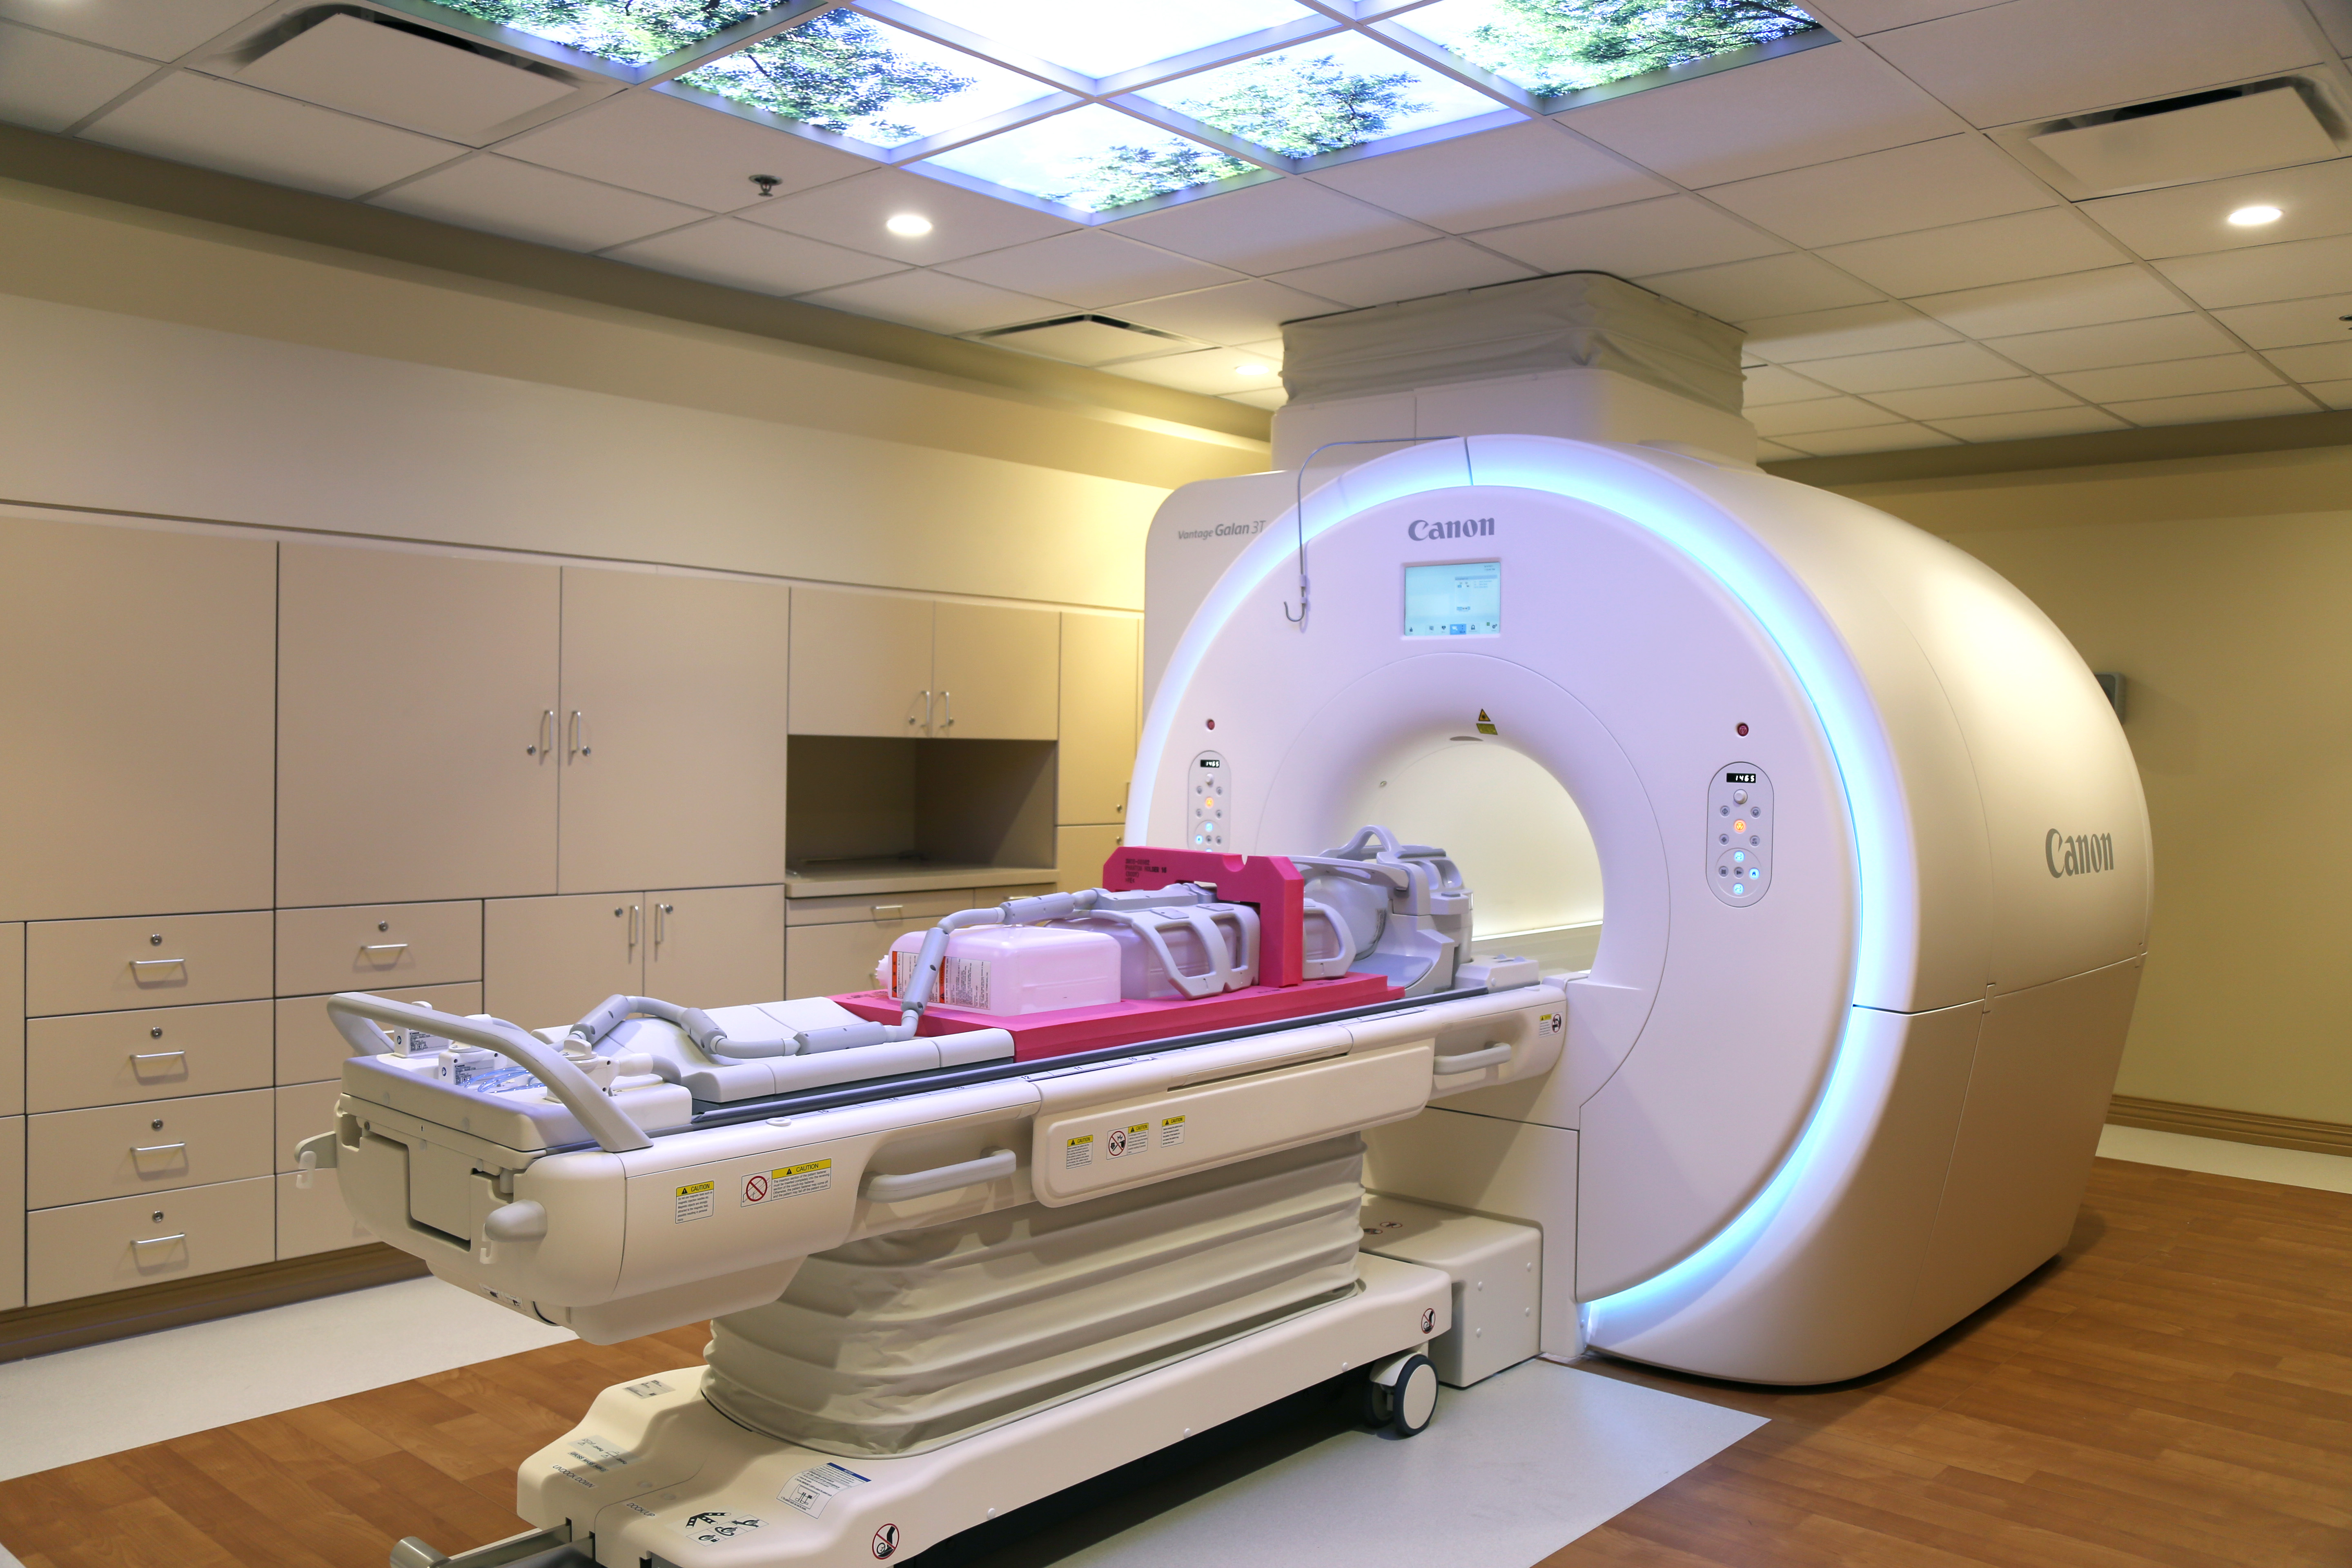 Canon Vantage Galan 3T MRI in Medical Office Building